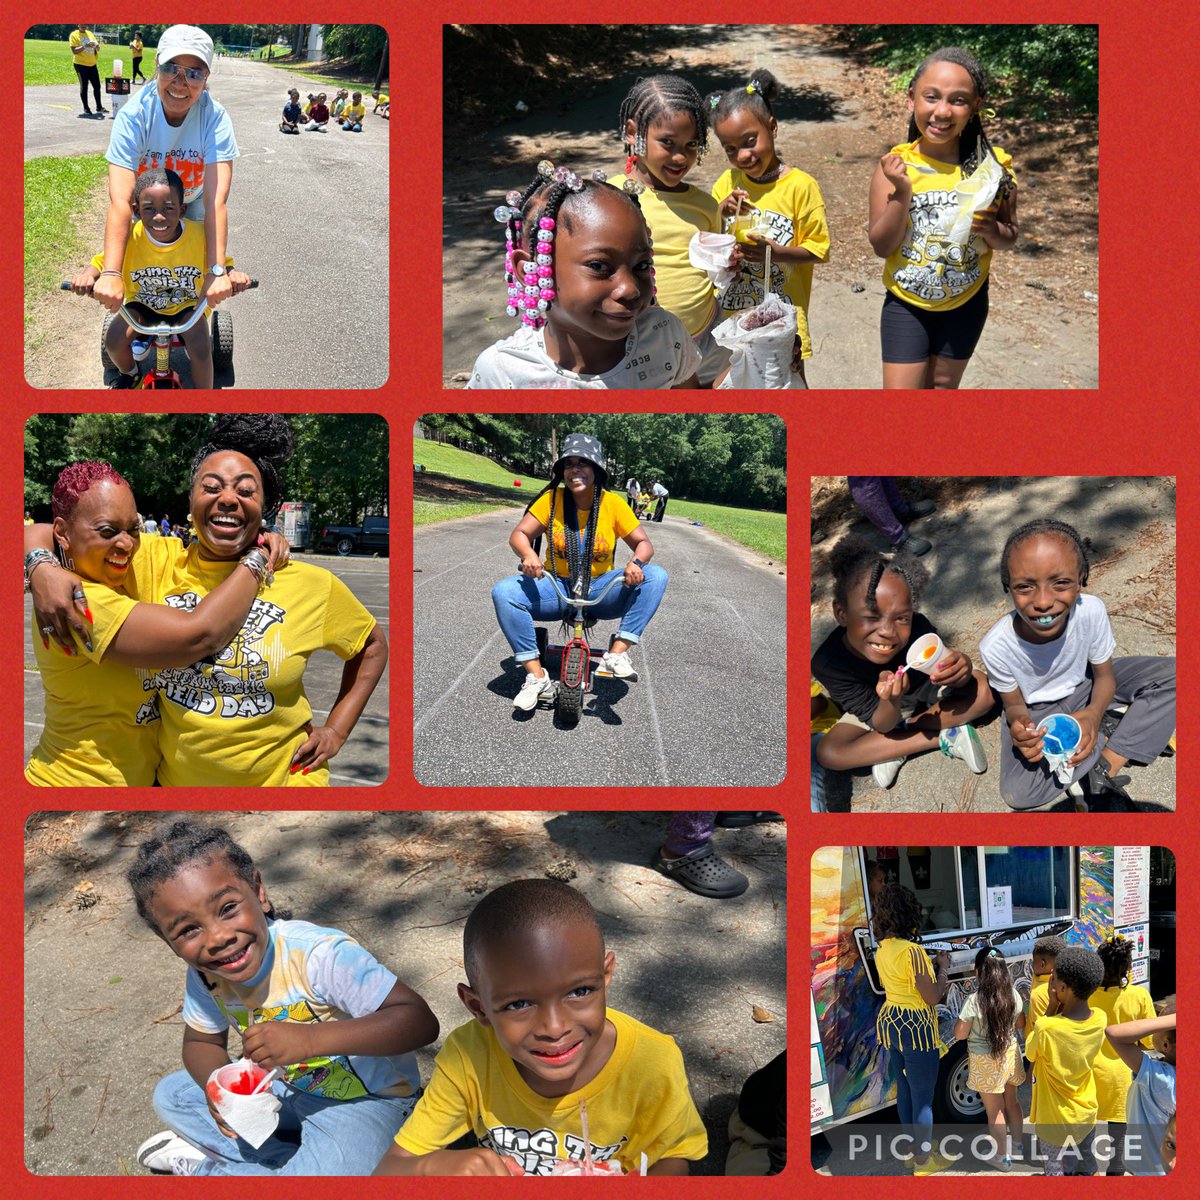 Day 1 @APSHAES Field Day was sooo much fun!! Thanks @CoachDavisinPE for planning such a wonderful event. An ice cold icee always hits the spot on a hot day! 🎉🎶💯 @CrystalJanuary @APS_HPE @apsupdate #LivingYourBestLife